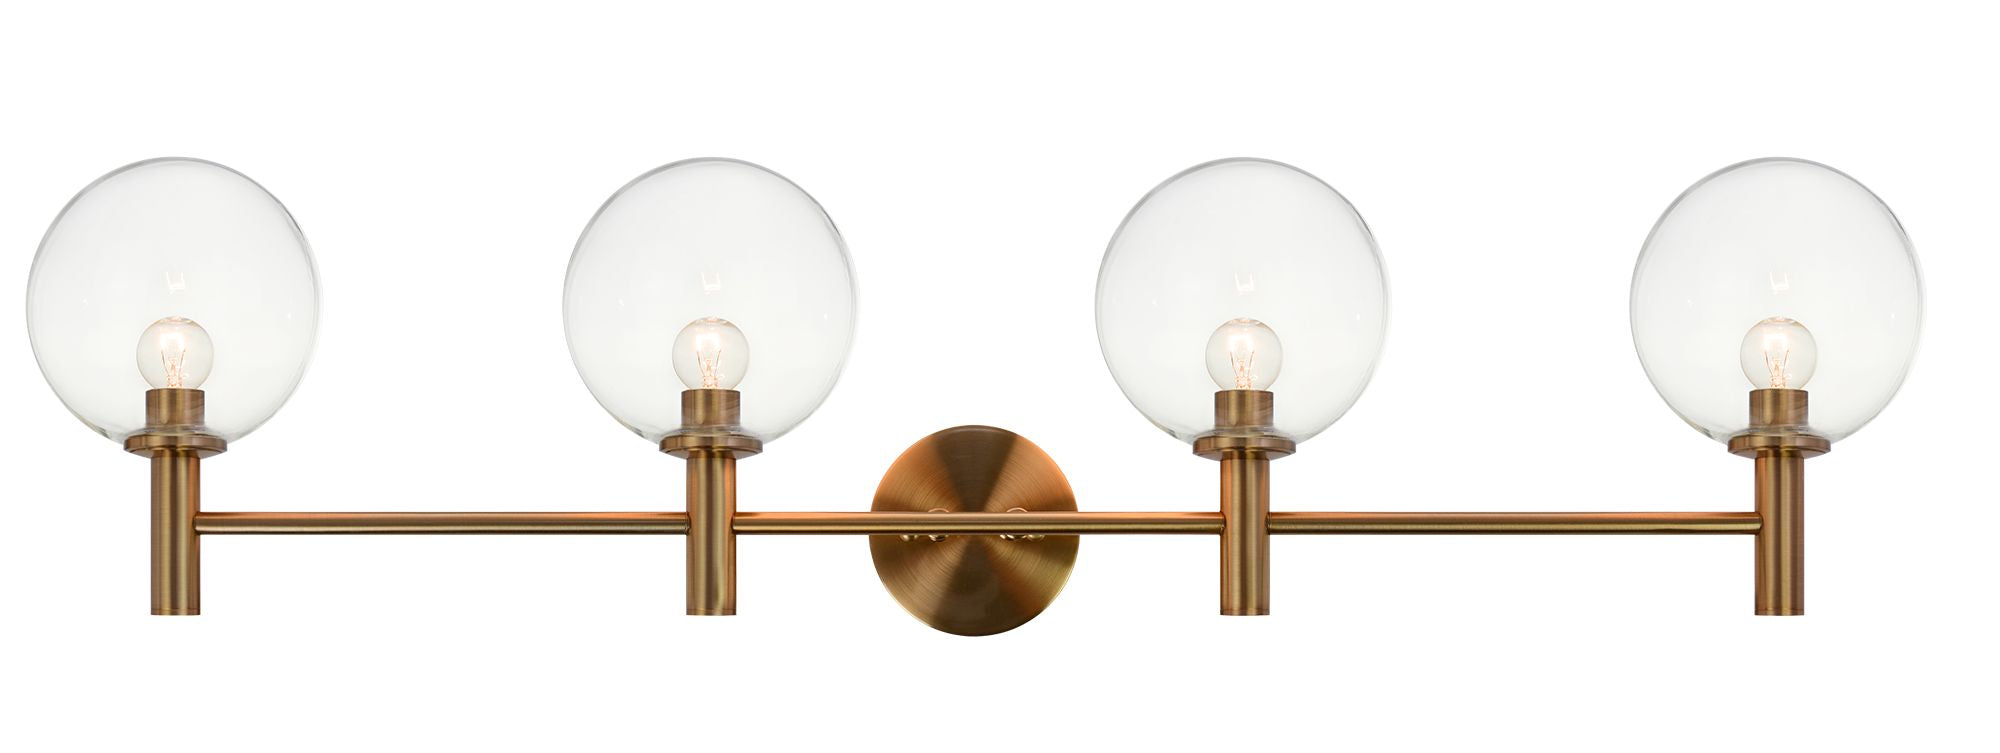 COSMO Wall sconce Gold - S06004AGCL | TEO